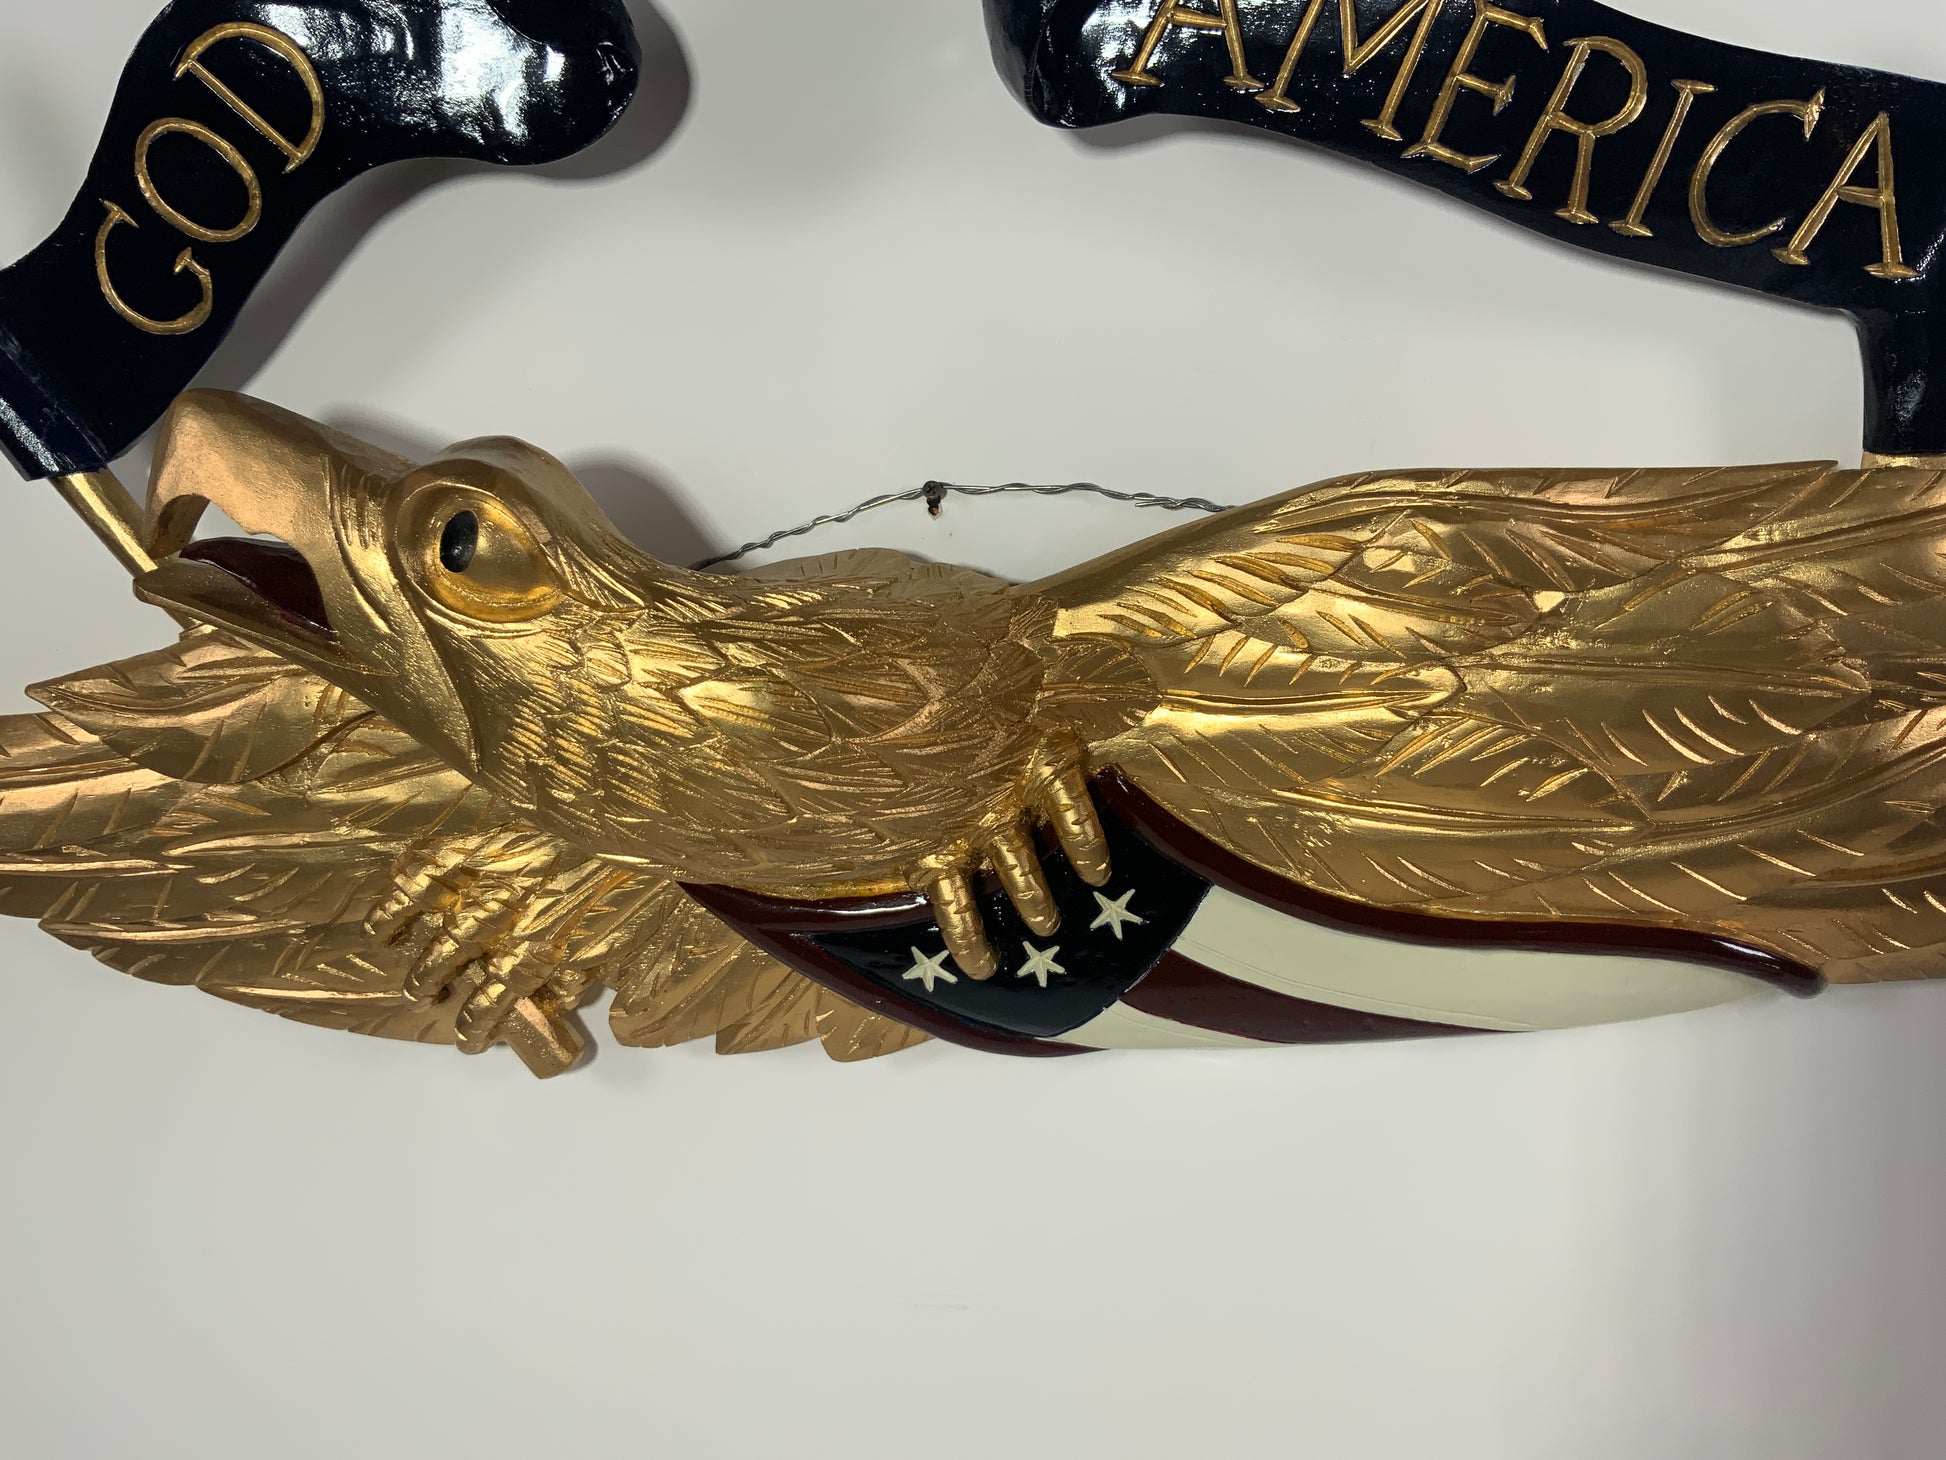 Gold Carved Eagle- "God Bless America" - Lannan Gallery